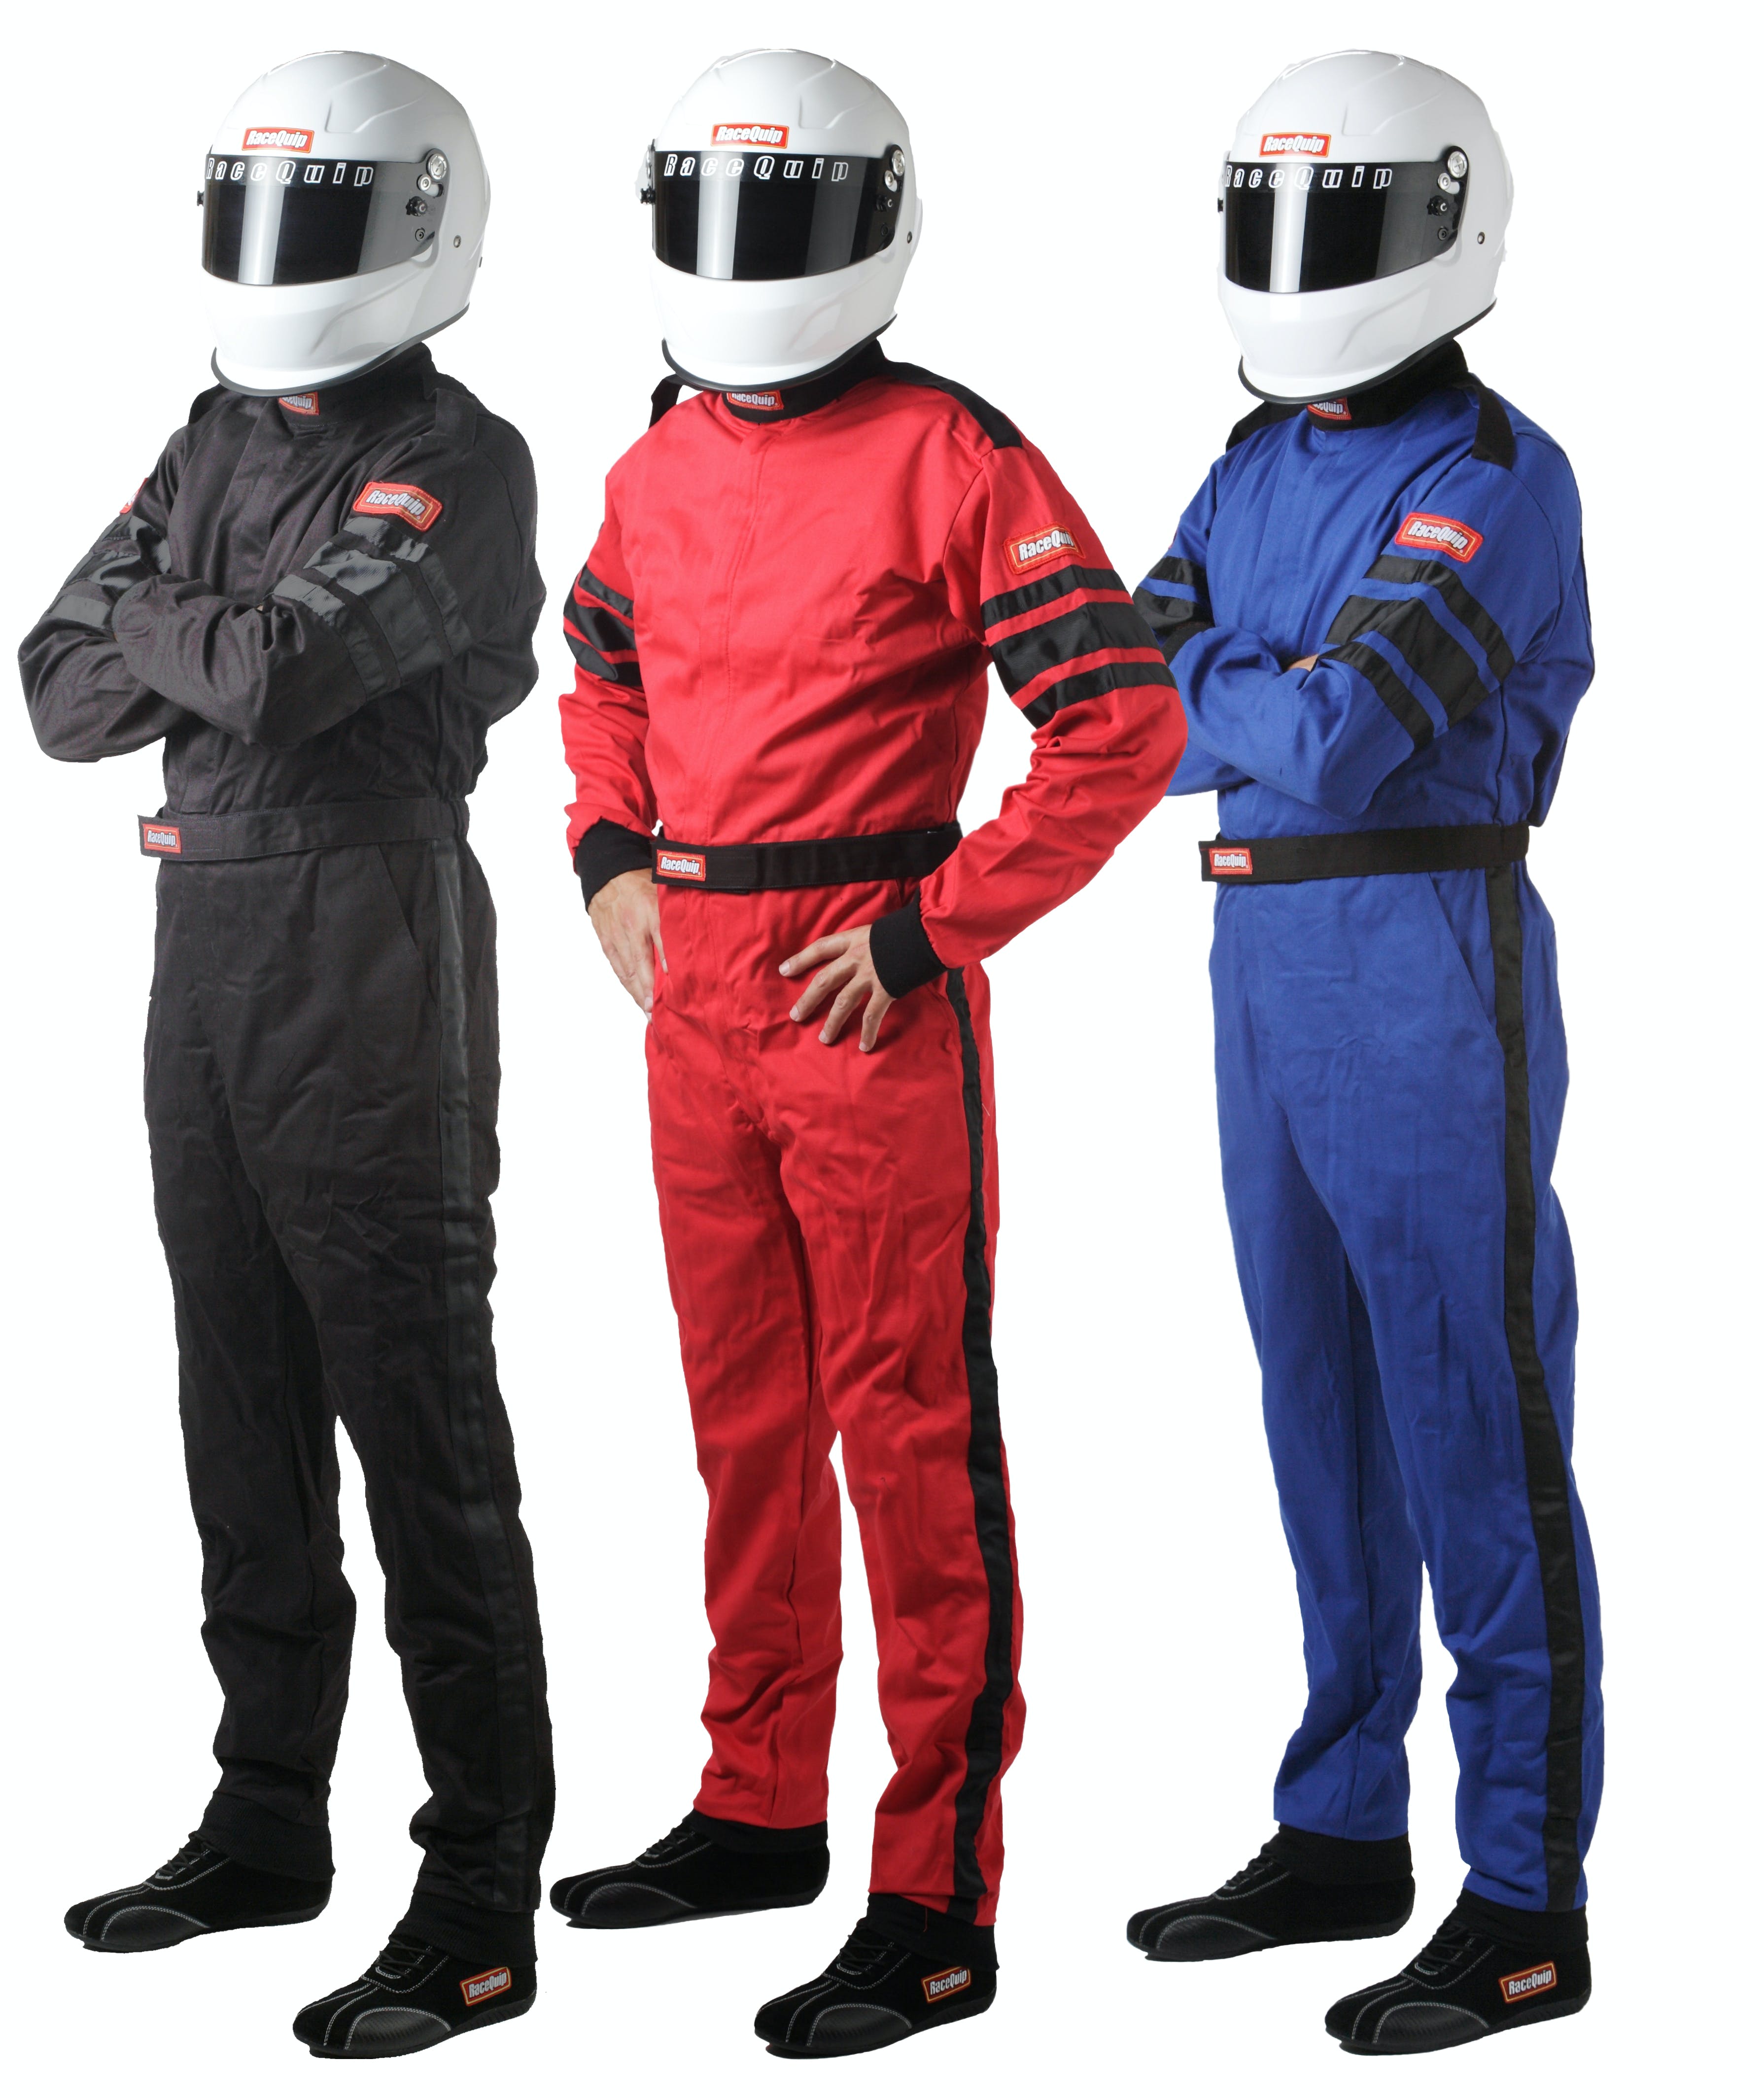 RaceQuip 110008 SFI-1 Pyrovatex One-Piece Single-Layer Racing Fire Suit (Black, 3X-Large)